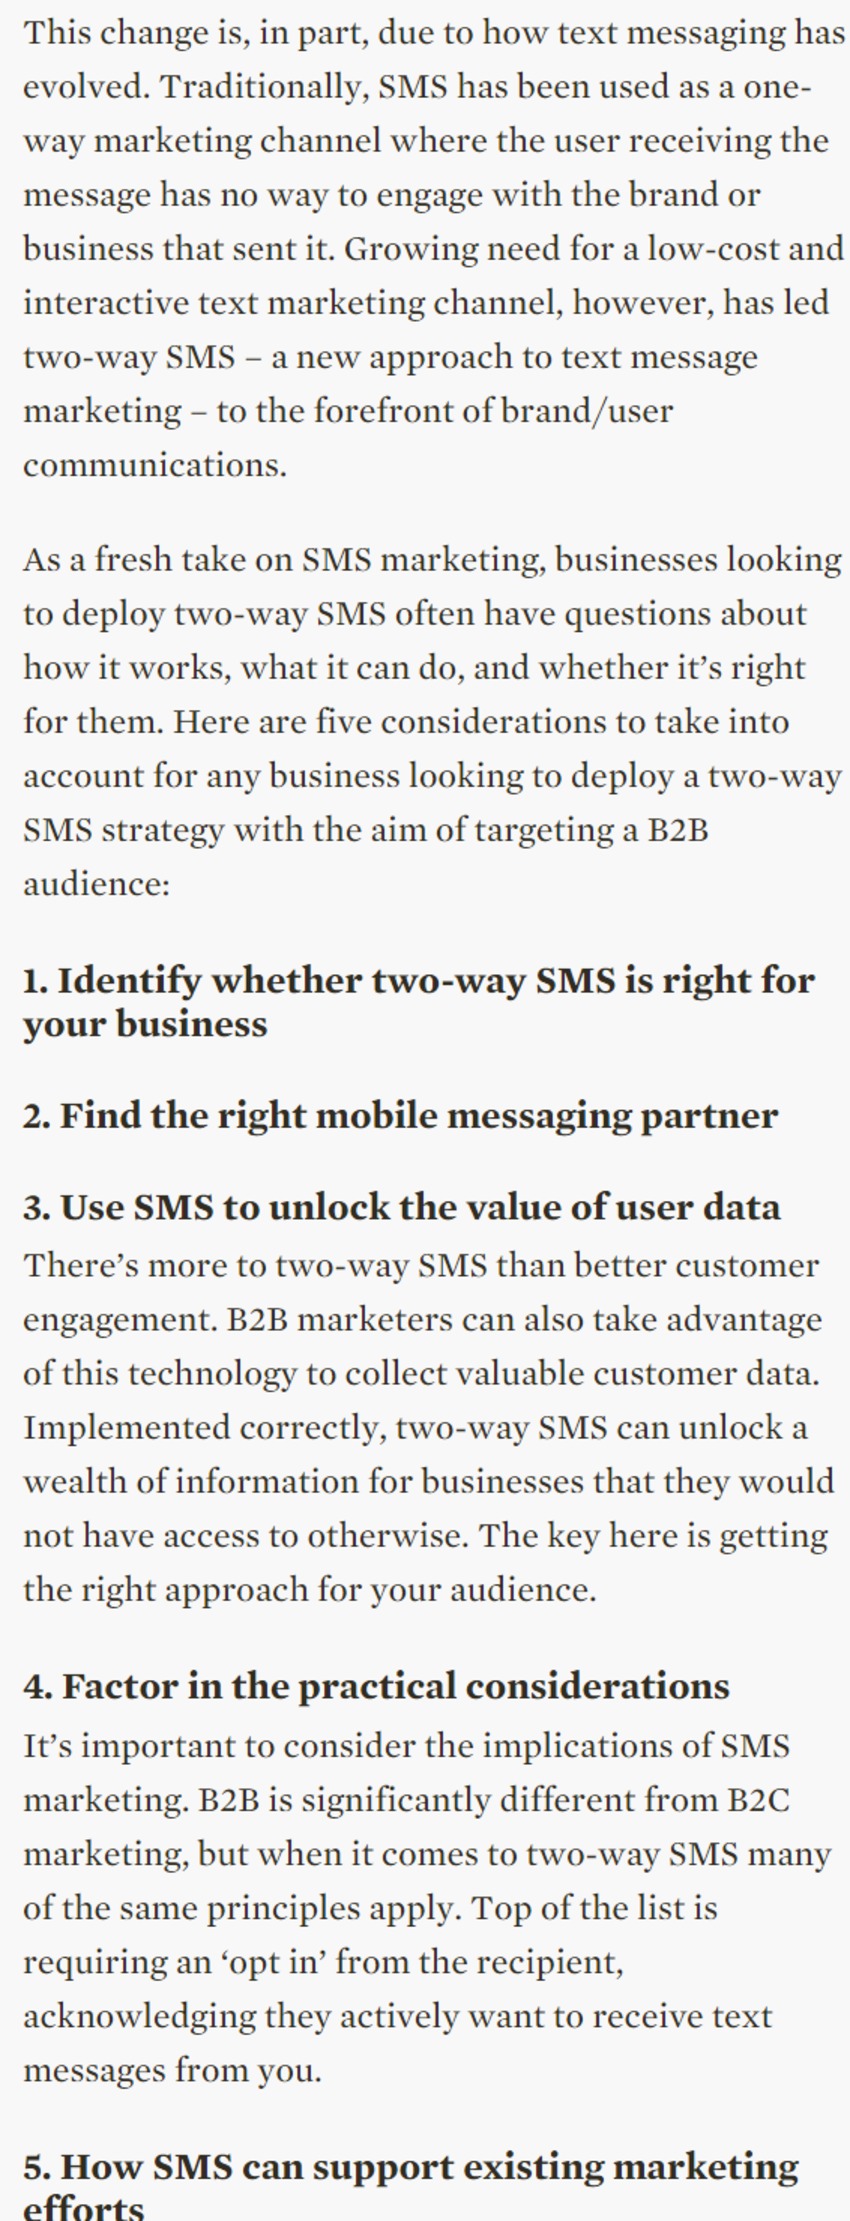 Better B2B marketing with two-way SMS - Fourth Source | The MarTech Digest | Scoop.it